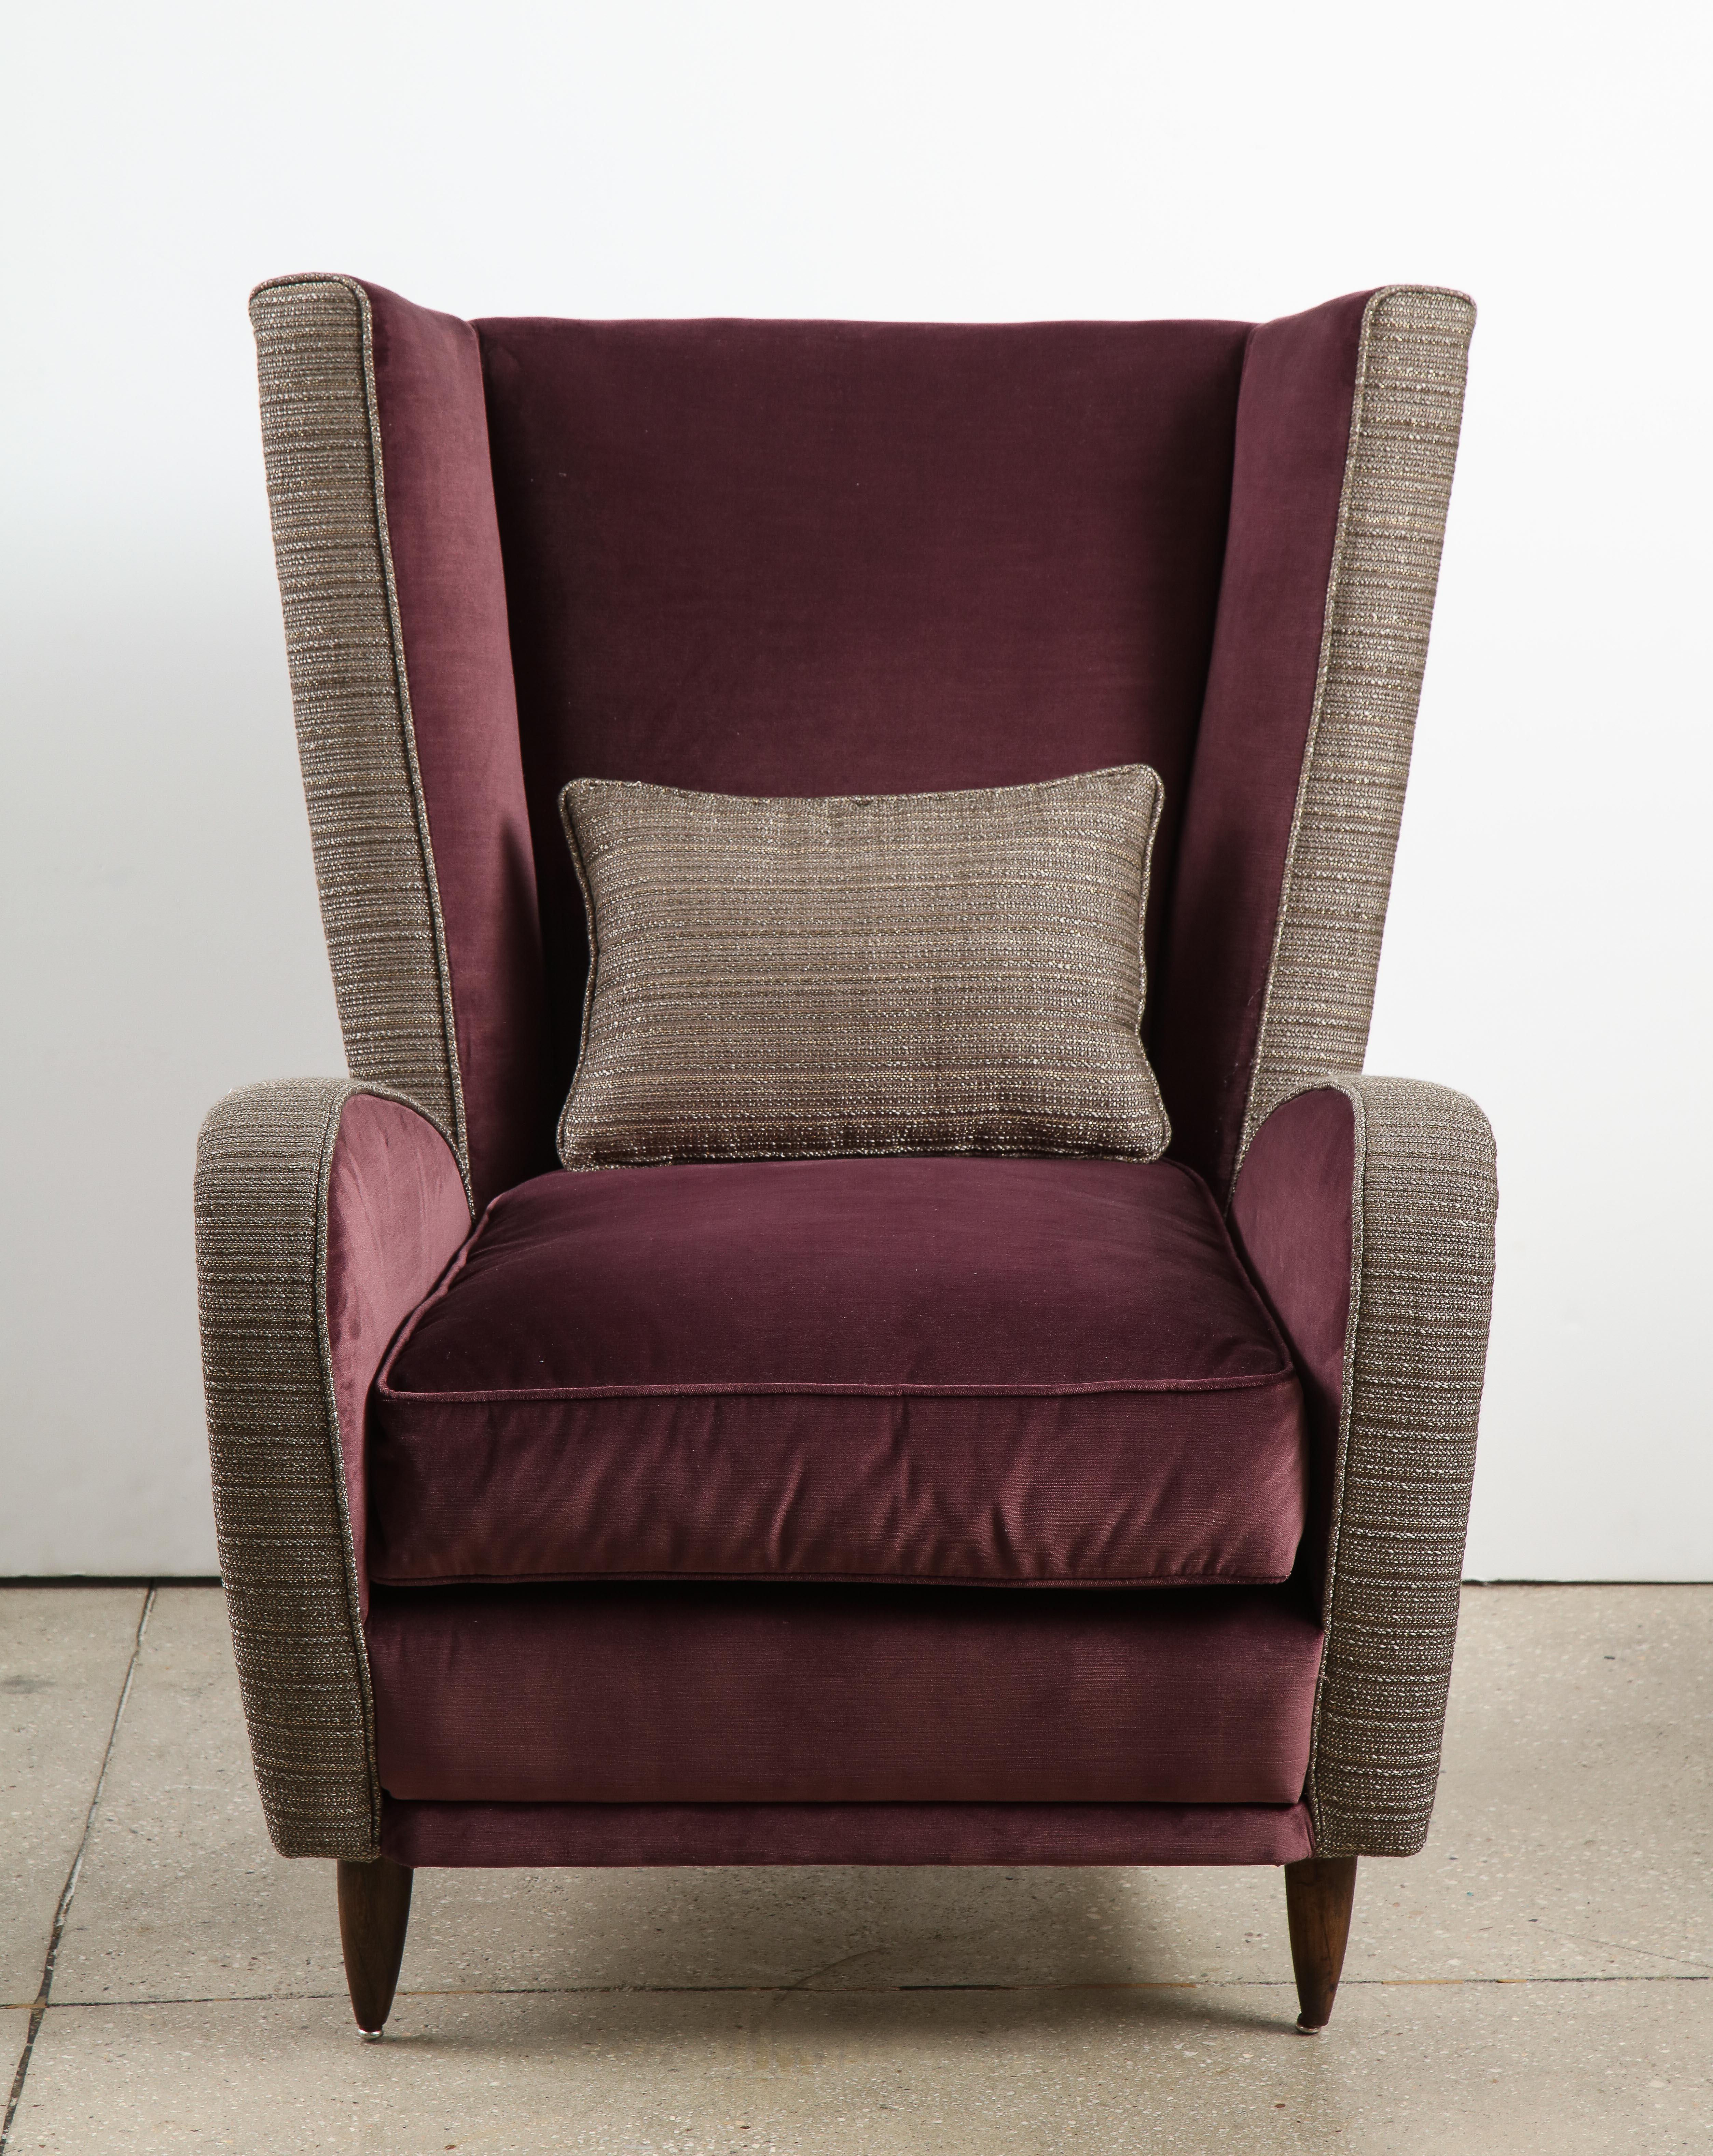 Midcentury Italian armchair by Paolo Buffa reupholstered in Nobilis plum cotton velvet and Dedar Lucilo bouclé fabric. Reupholstered by a master craftsman in Tuscany.

The chair comes with a complementary back cushion.